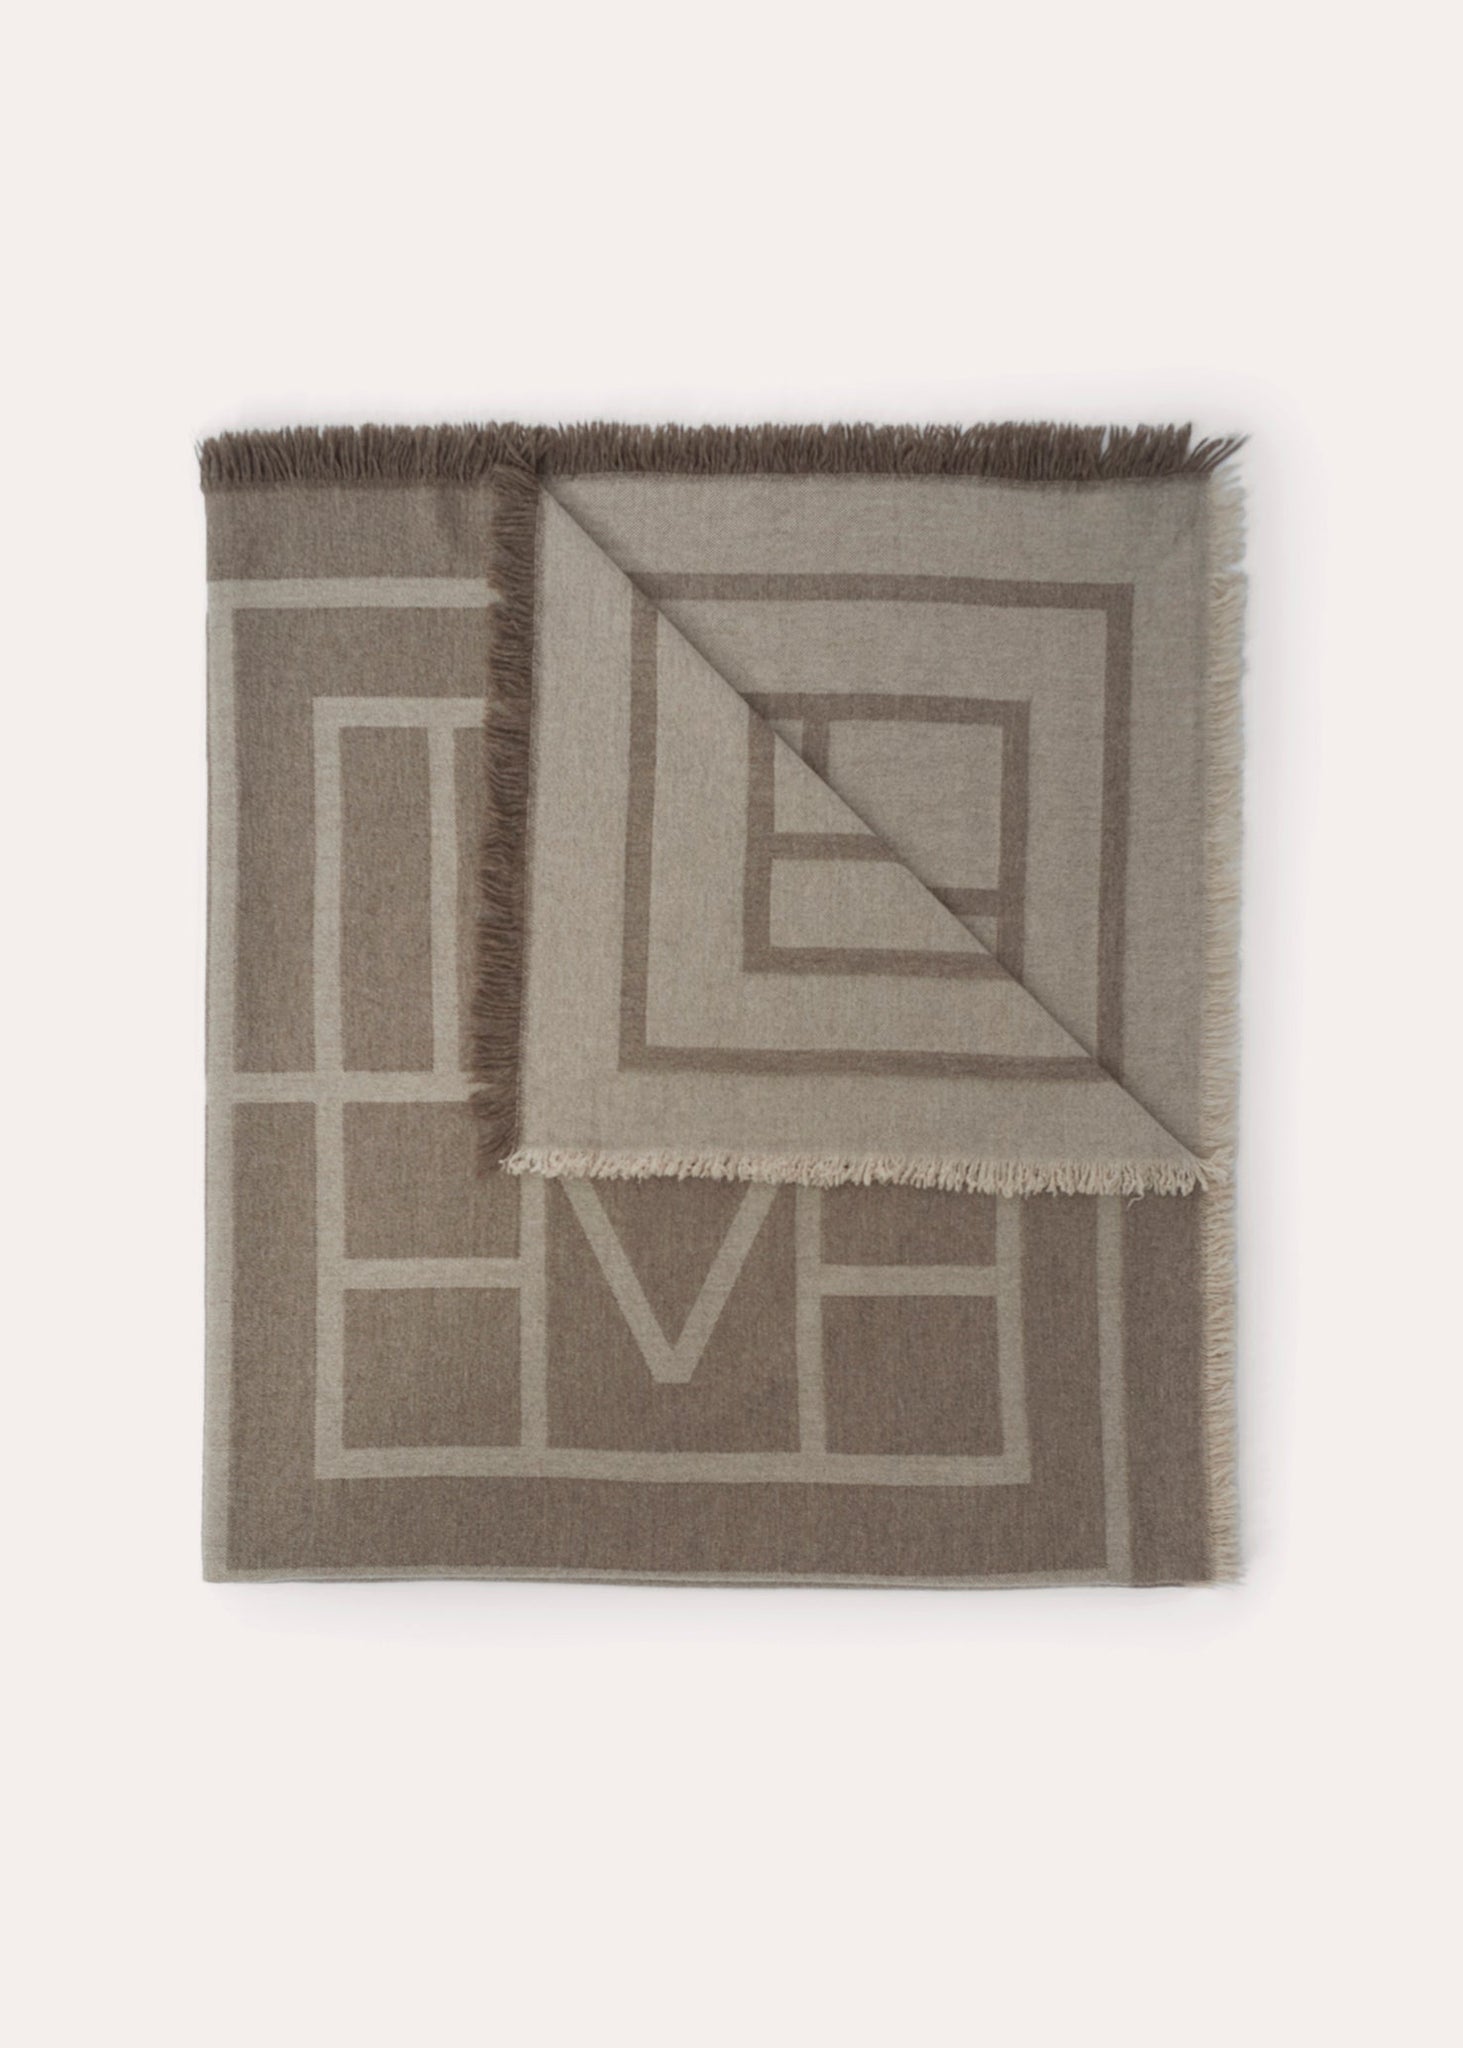 Monogram Wool And Cashmere Scarf in Brown - Toteme